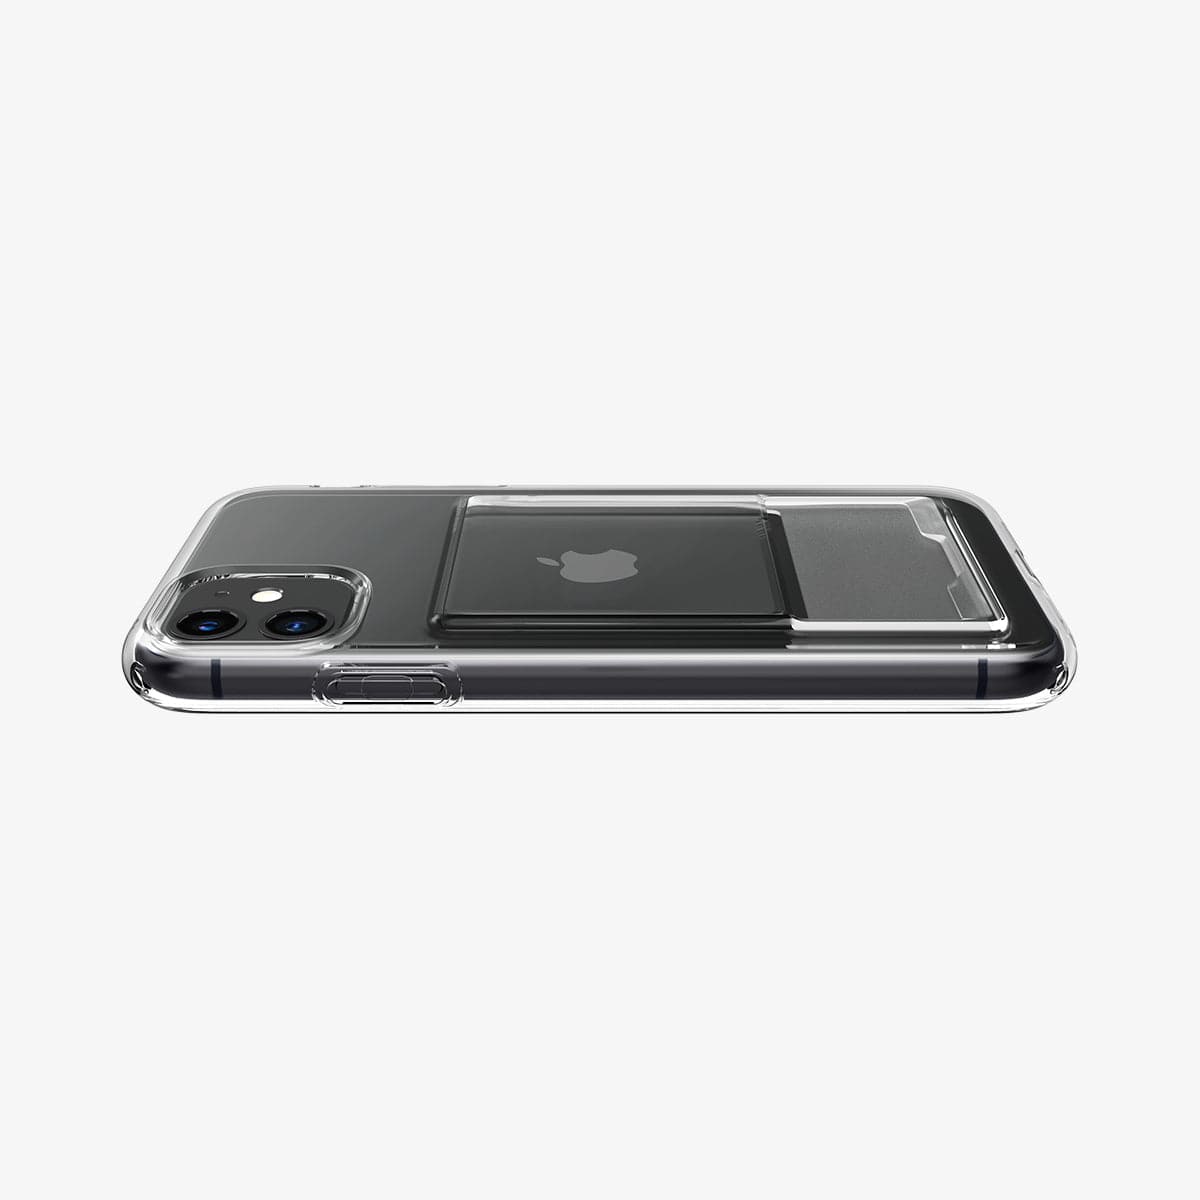 ACS02936 - iPhone 11 Case Crystal Slot in crystal clear showing the back and side with device laying flat